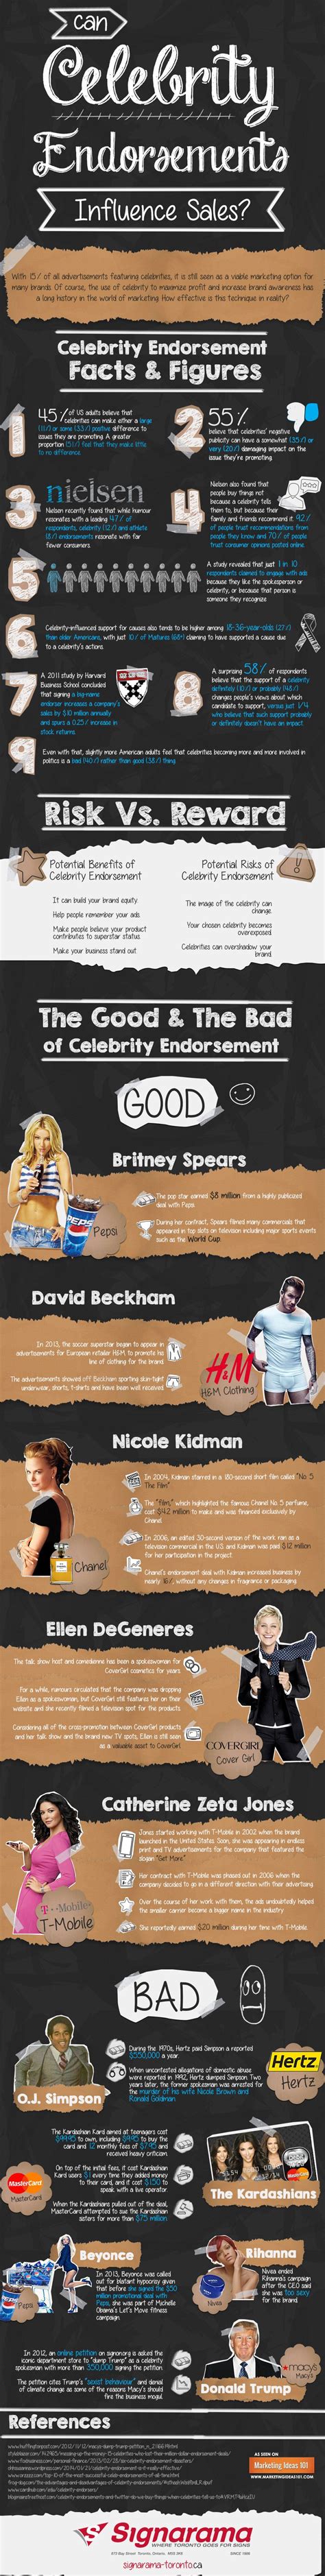 Infographic Can Celebrity Endorsements Influence Sales Celebrity Endorsement Has Always